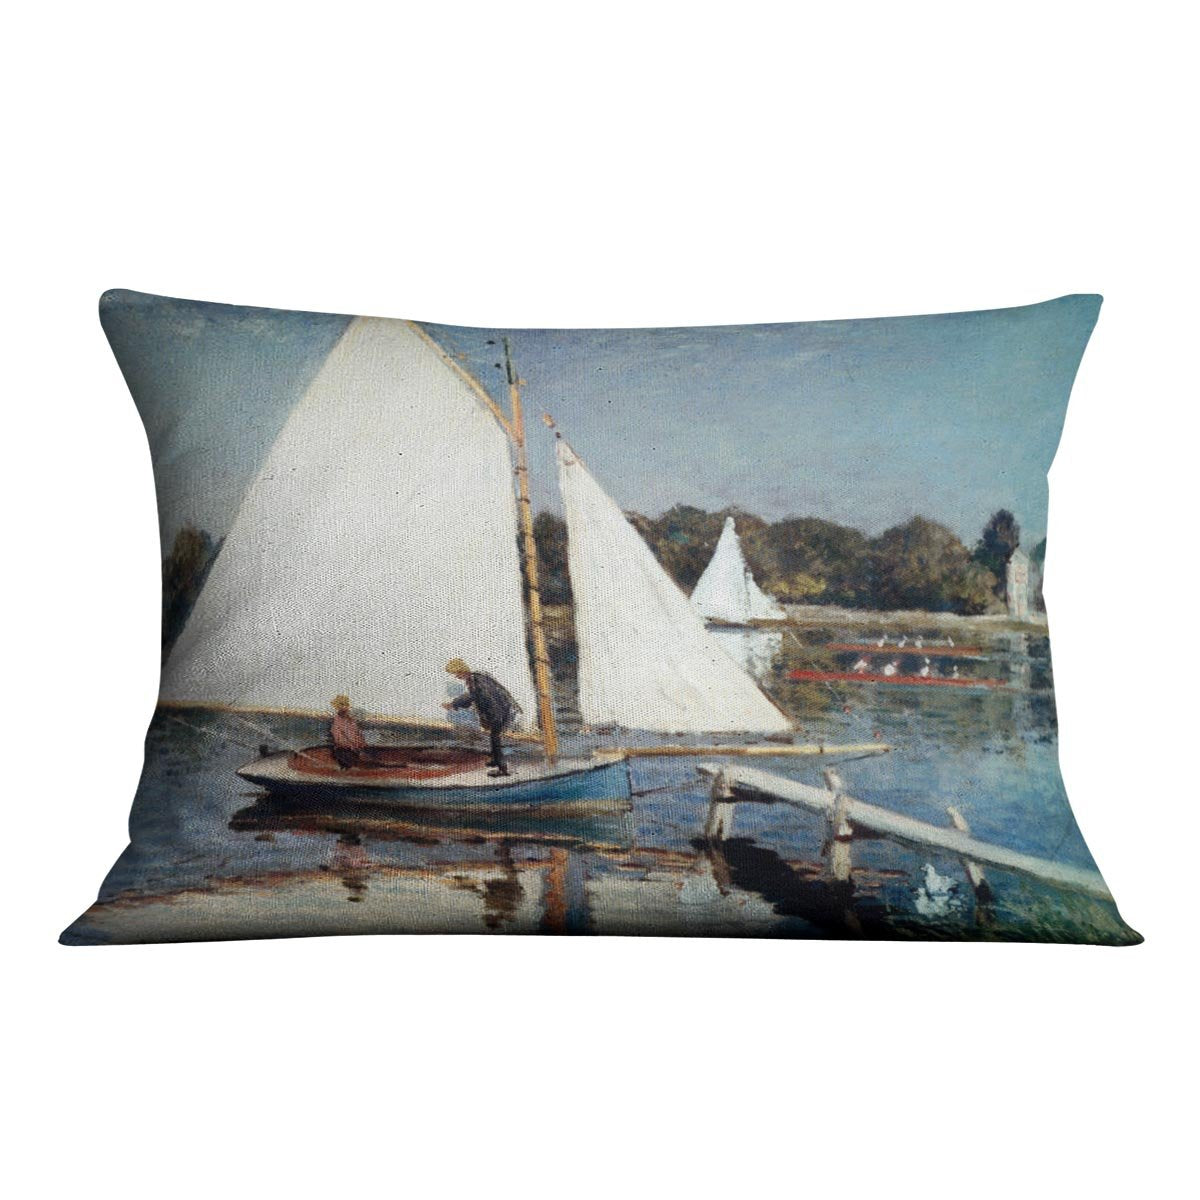 Sailing At Argenteuil 2 by Monet Throw Pillow